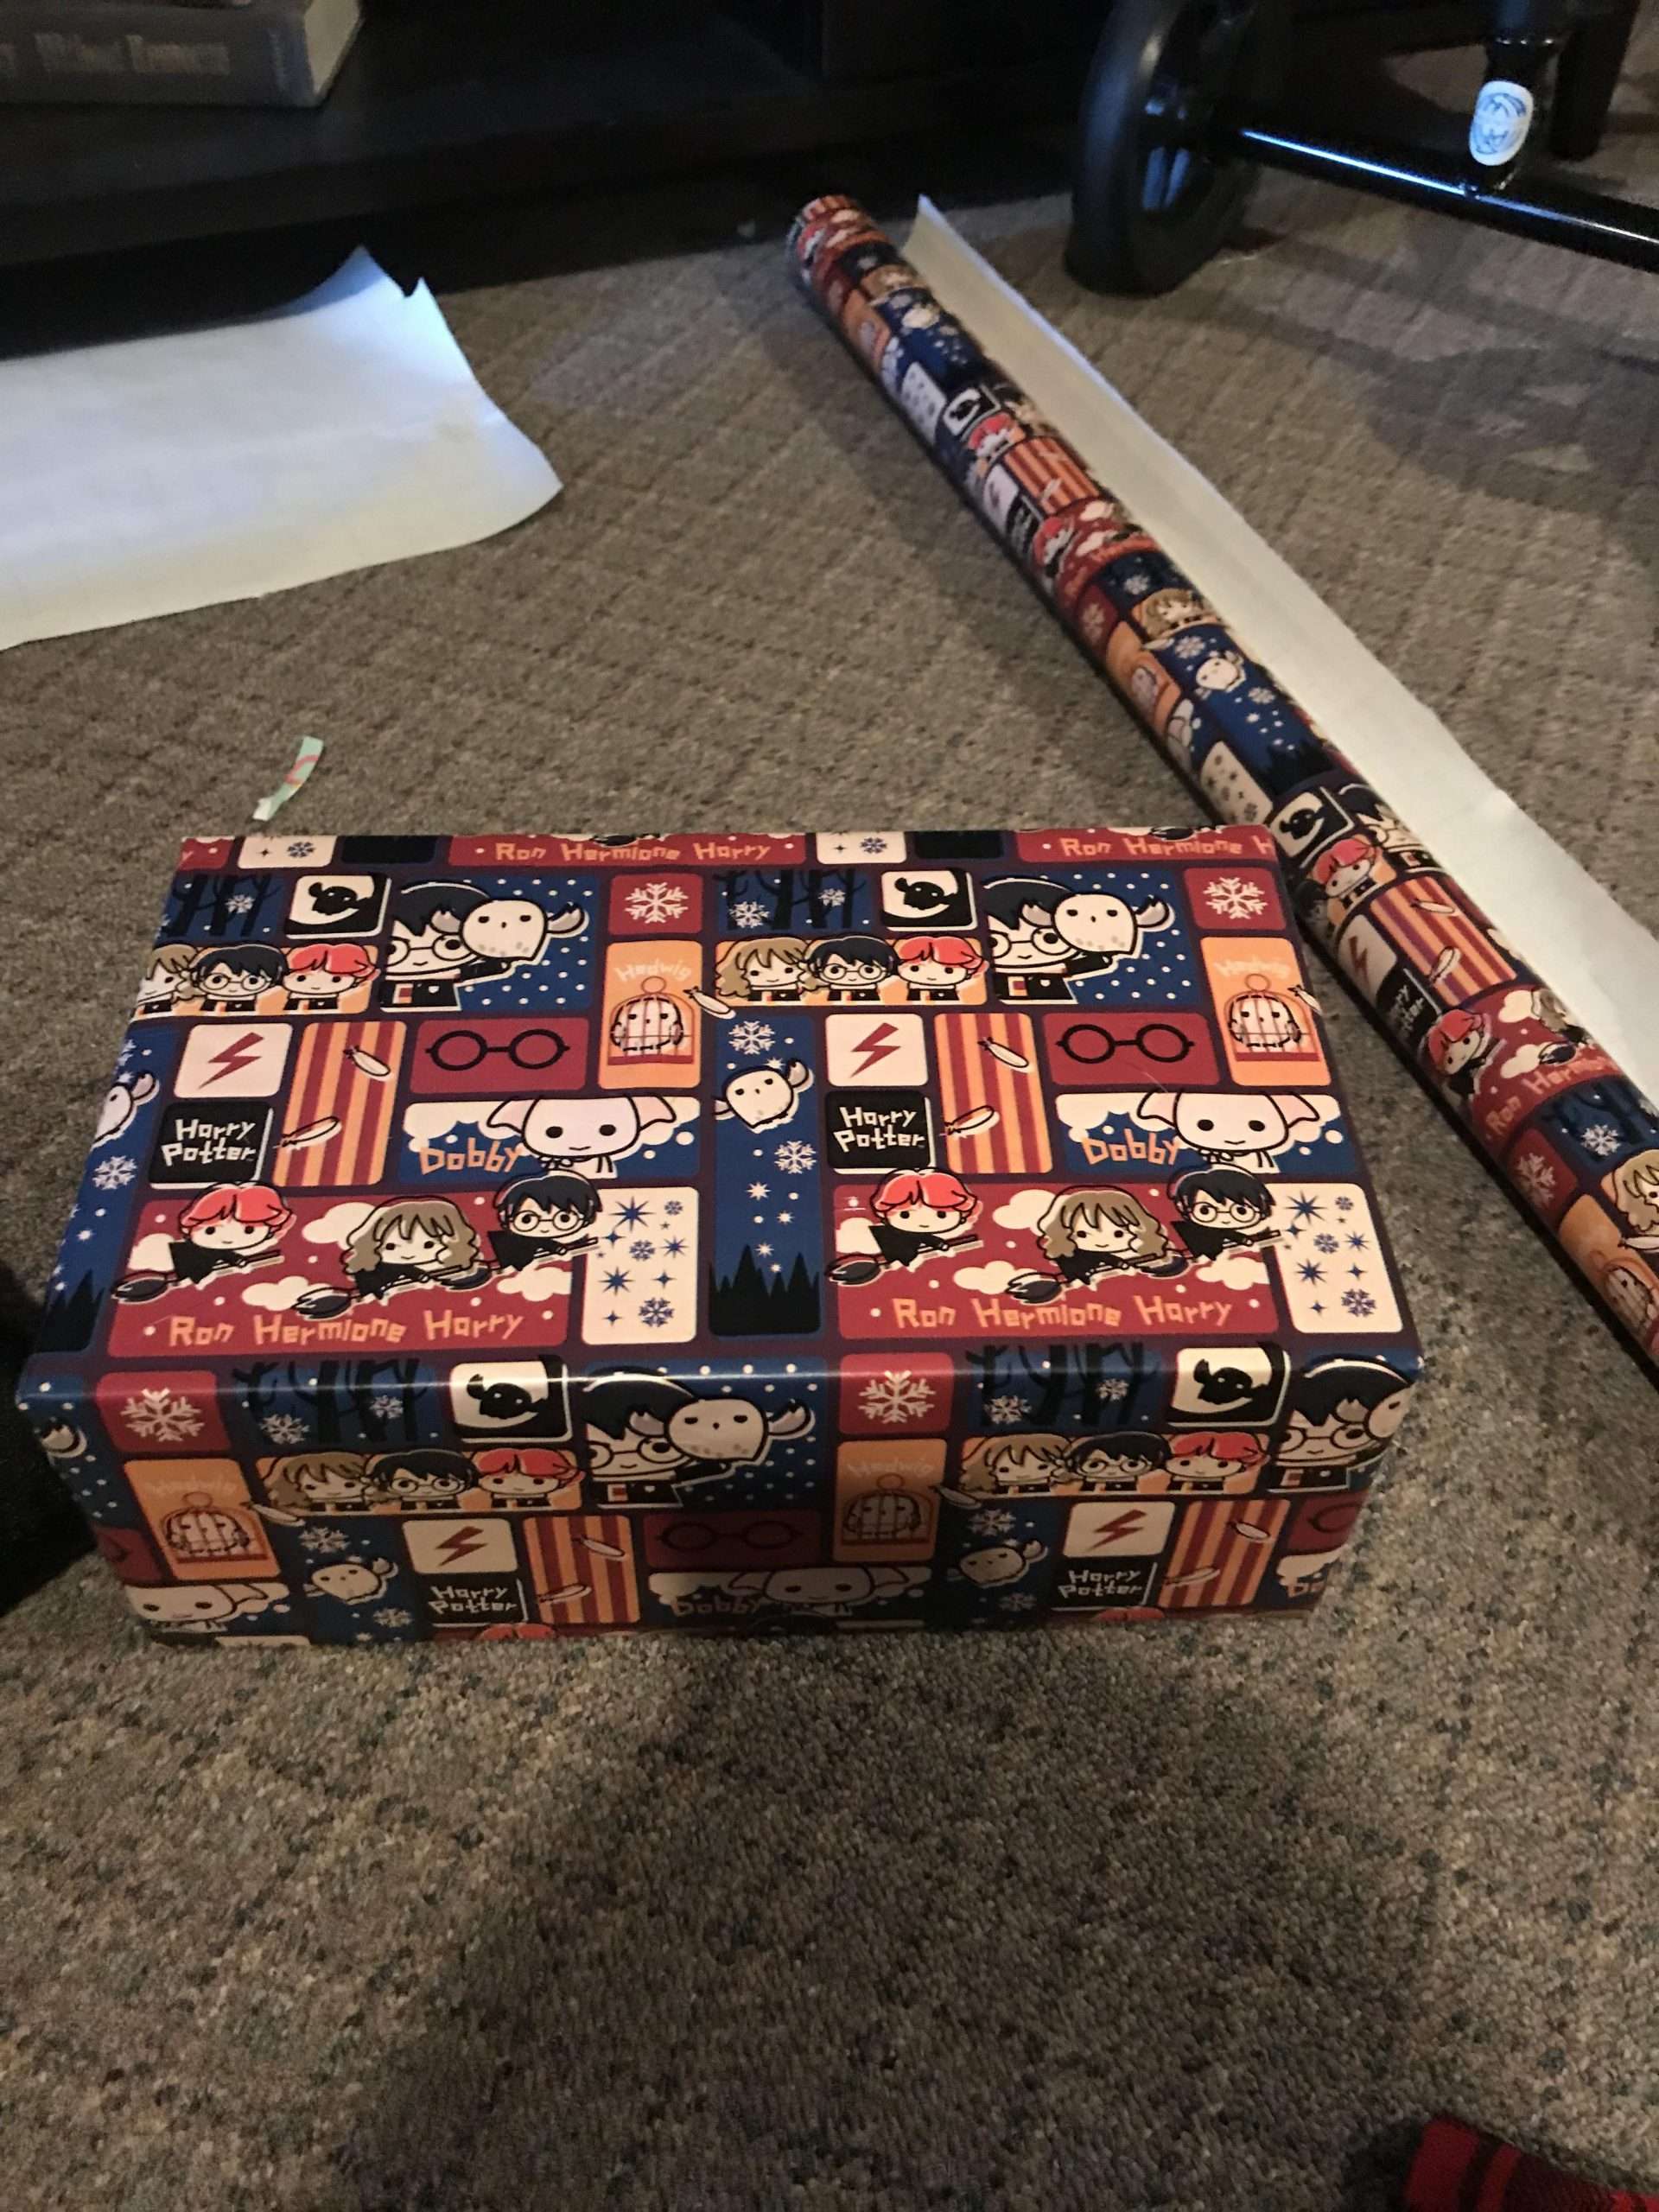 I thought I would share the Harry Potter wrapping paper I found at ...